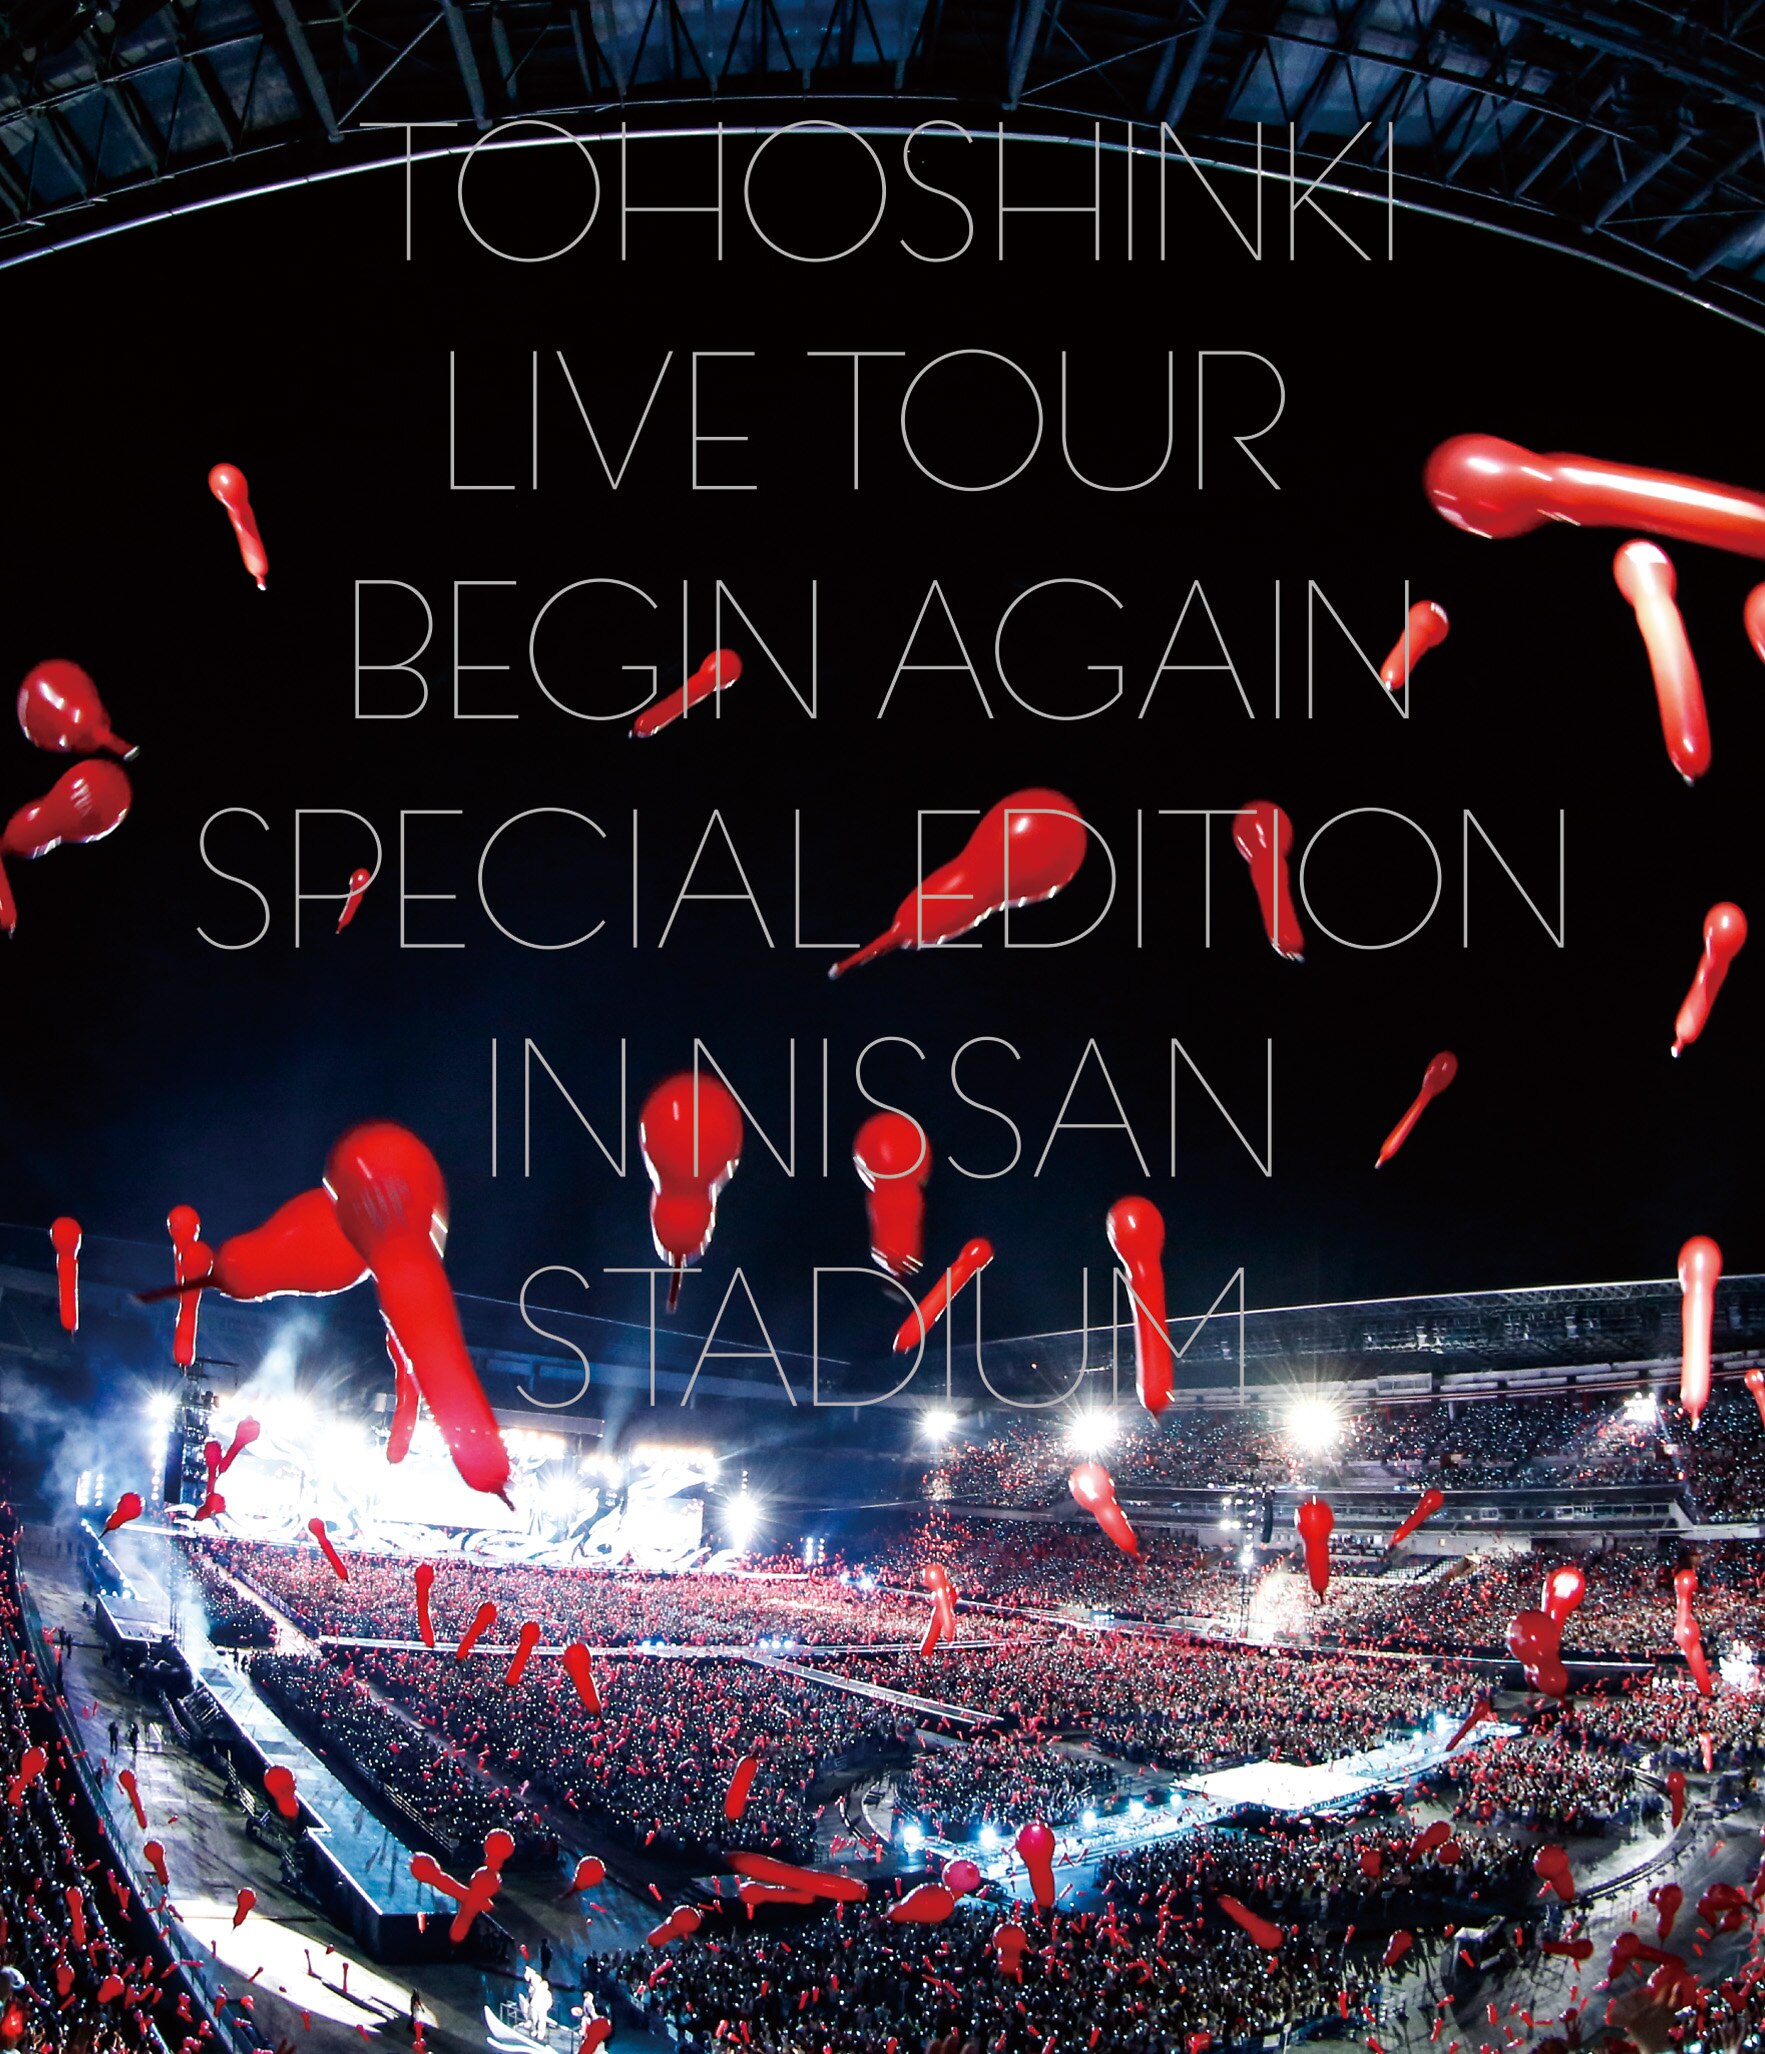 LIVE DVD &Blu-ray『東方神起 LIVE TOUR ～Begin Again～ Special 